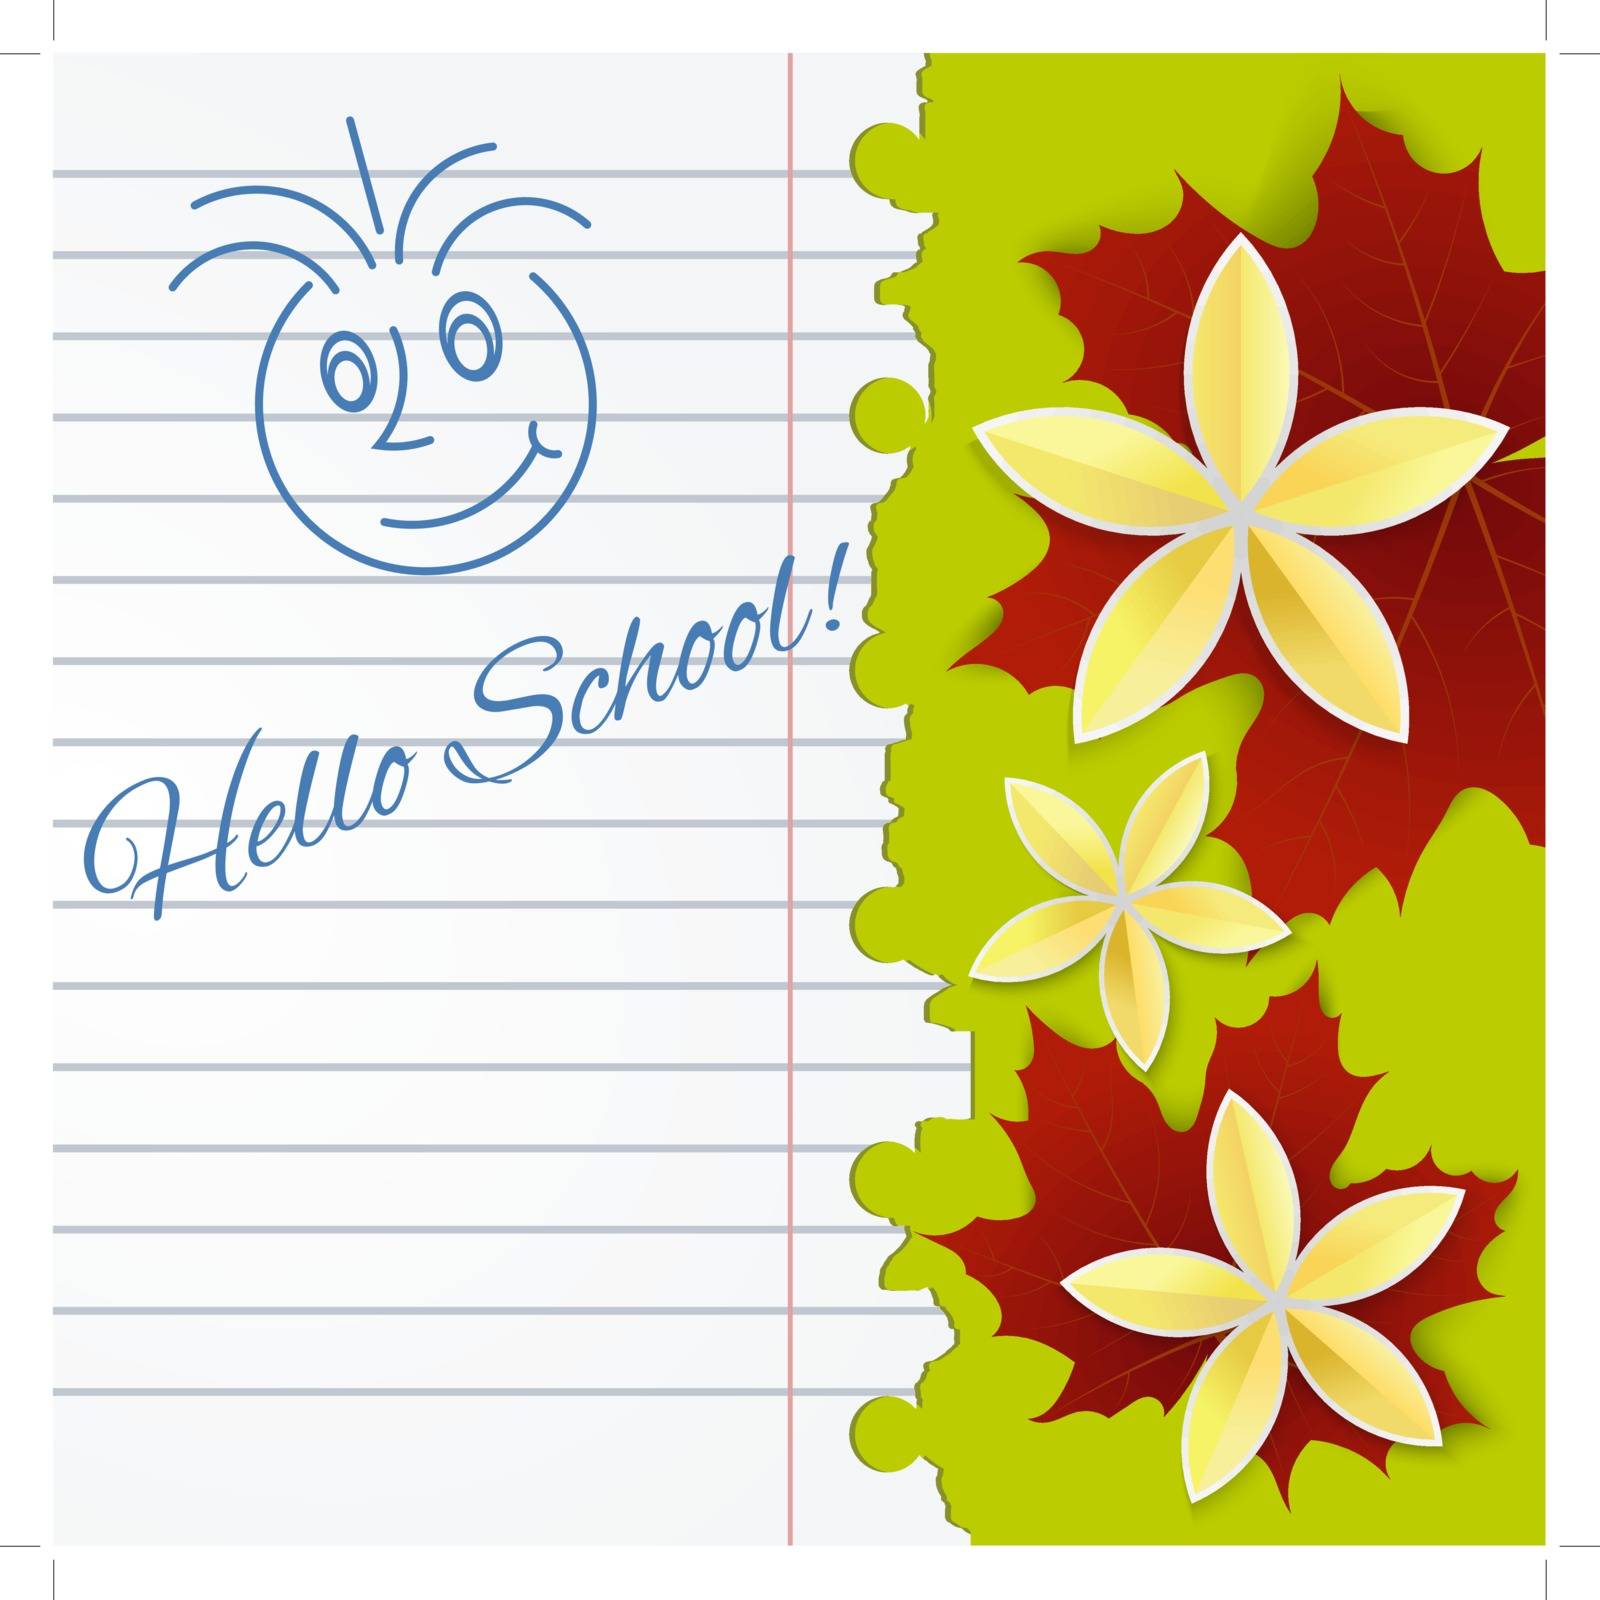 Sheet of school notebook with flowers and  by Larser